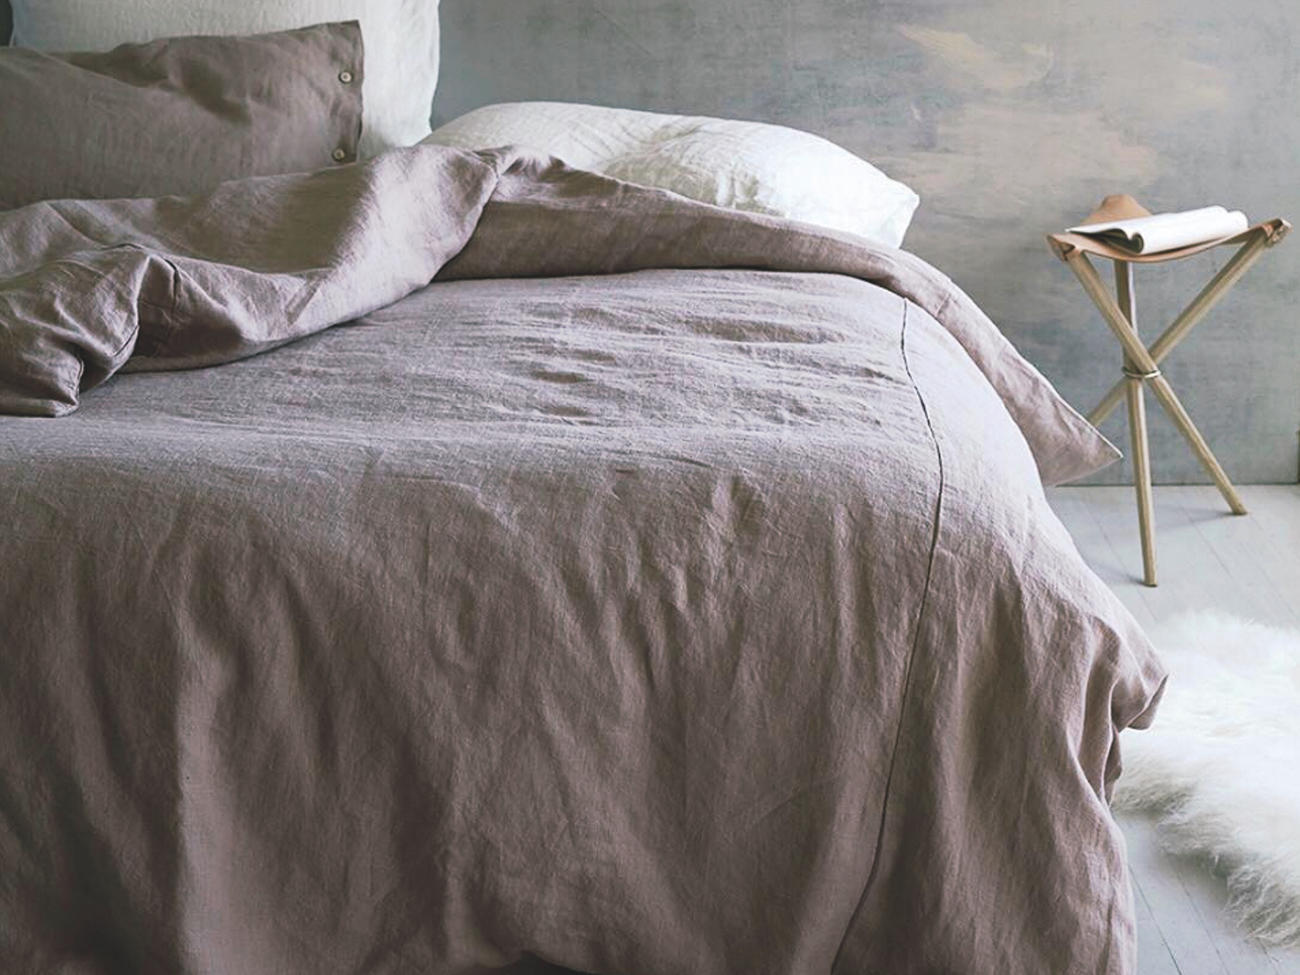 Win a Bedroom Refresh from Rough Linen!